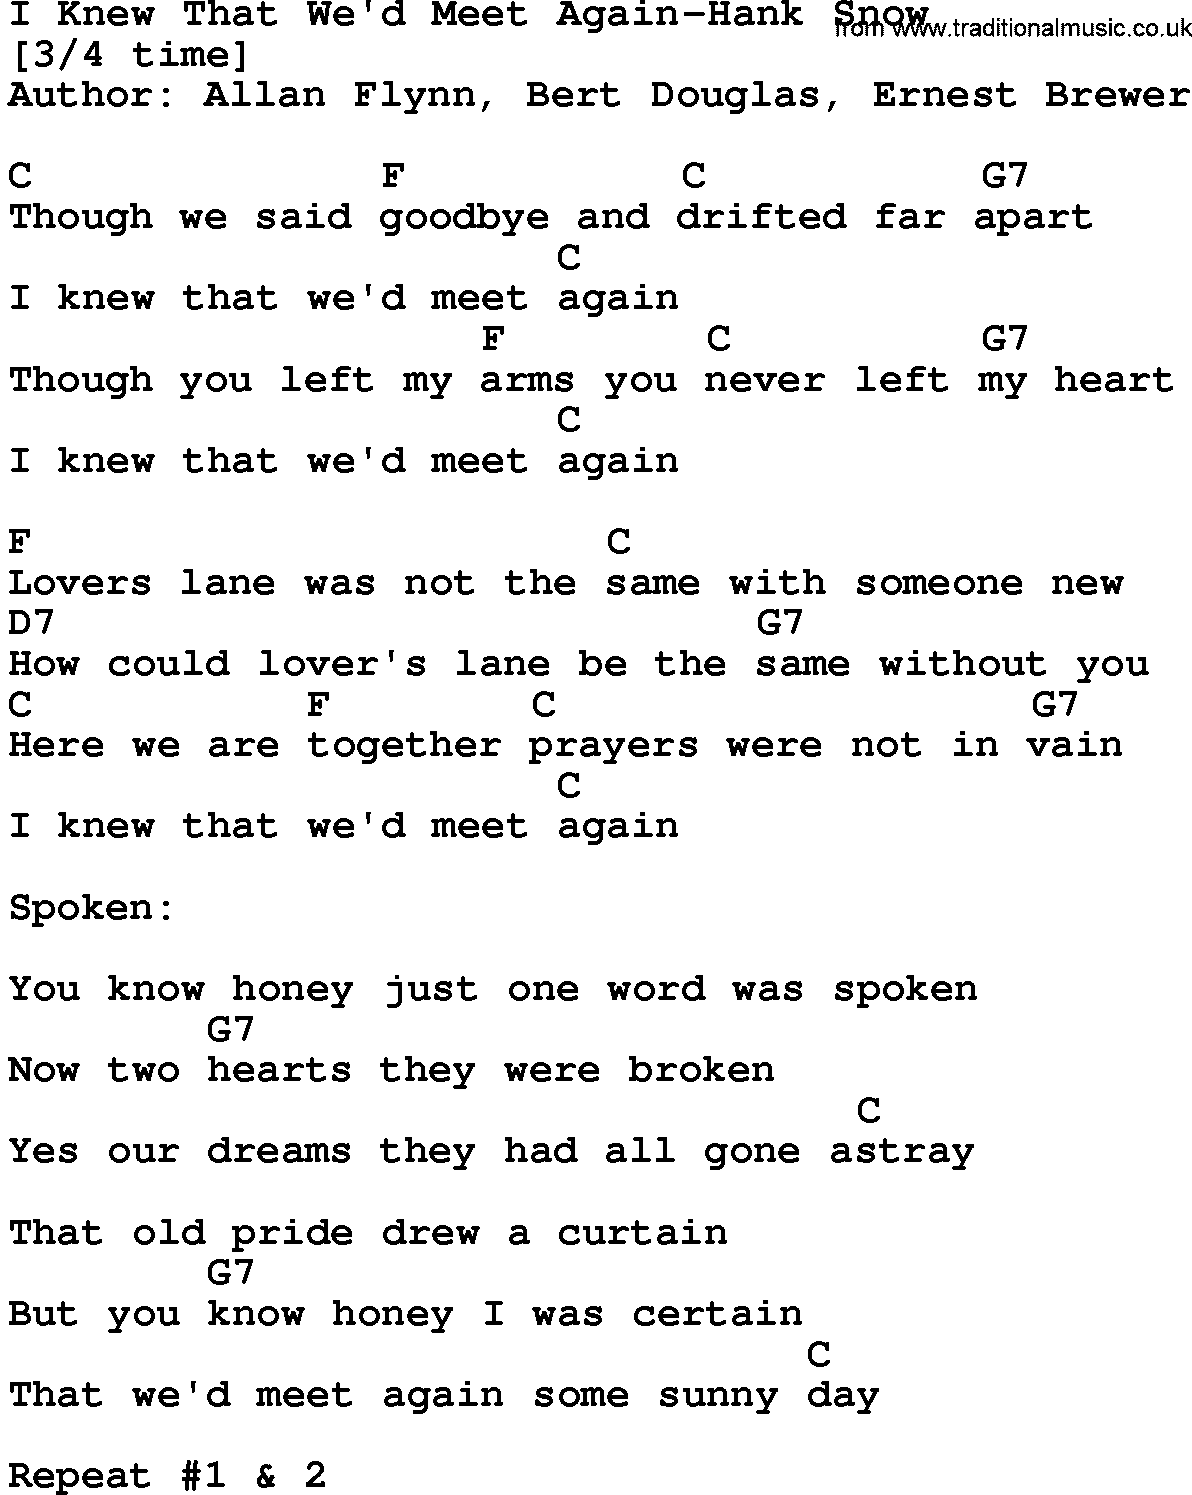 Country music song: I Knew That We'd Meet Again-Hank Snow lyrics and chords